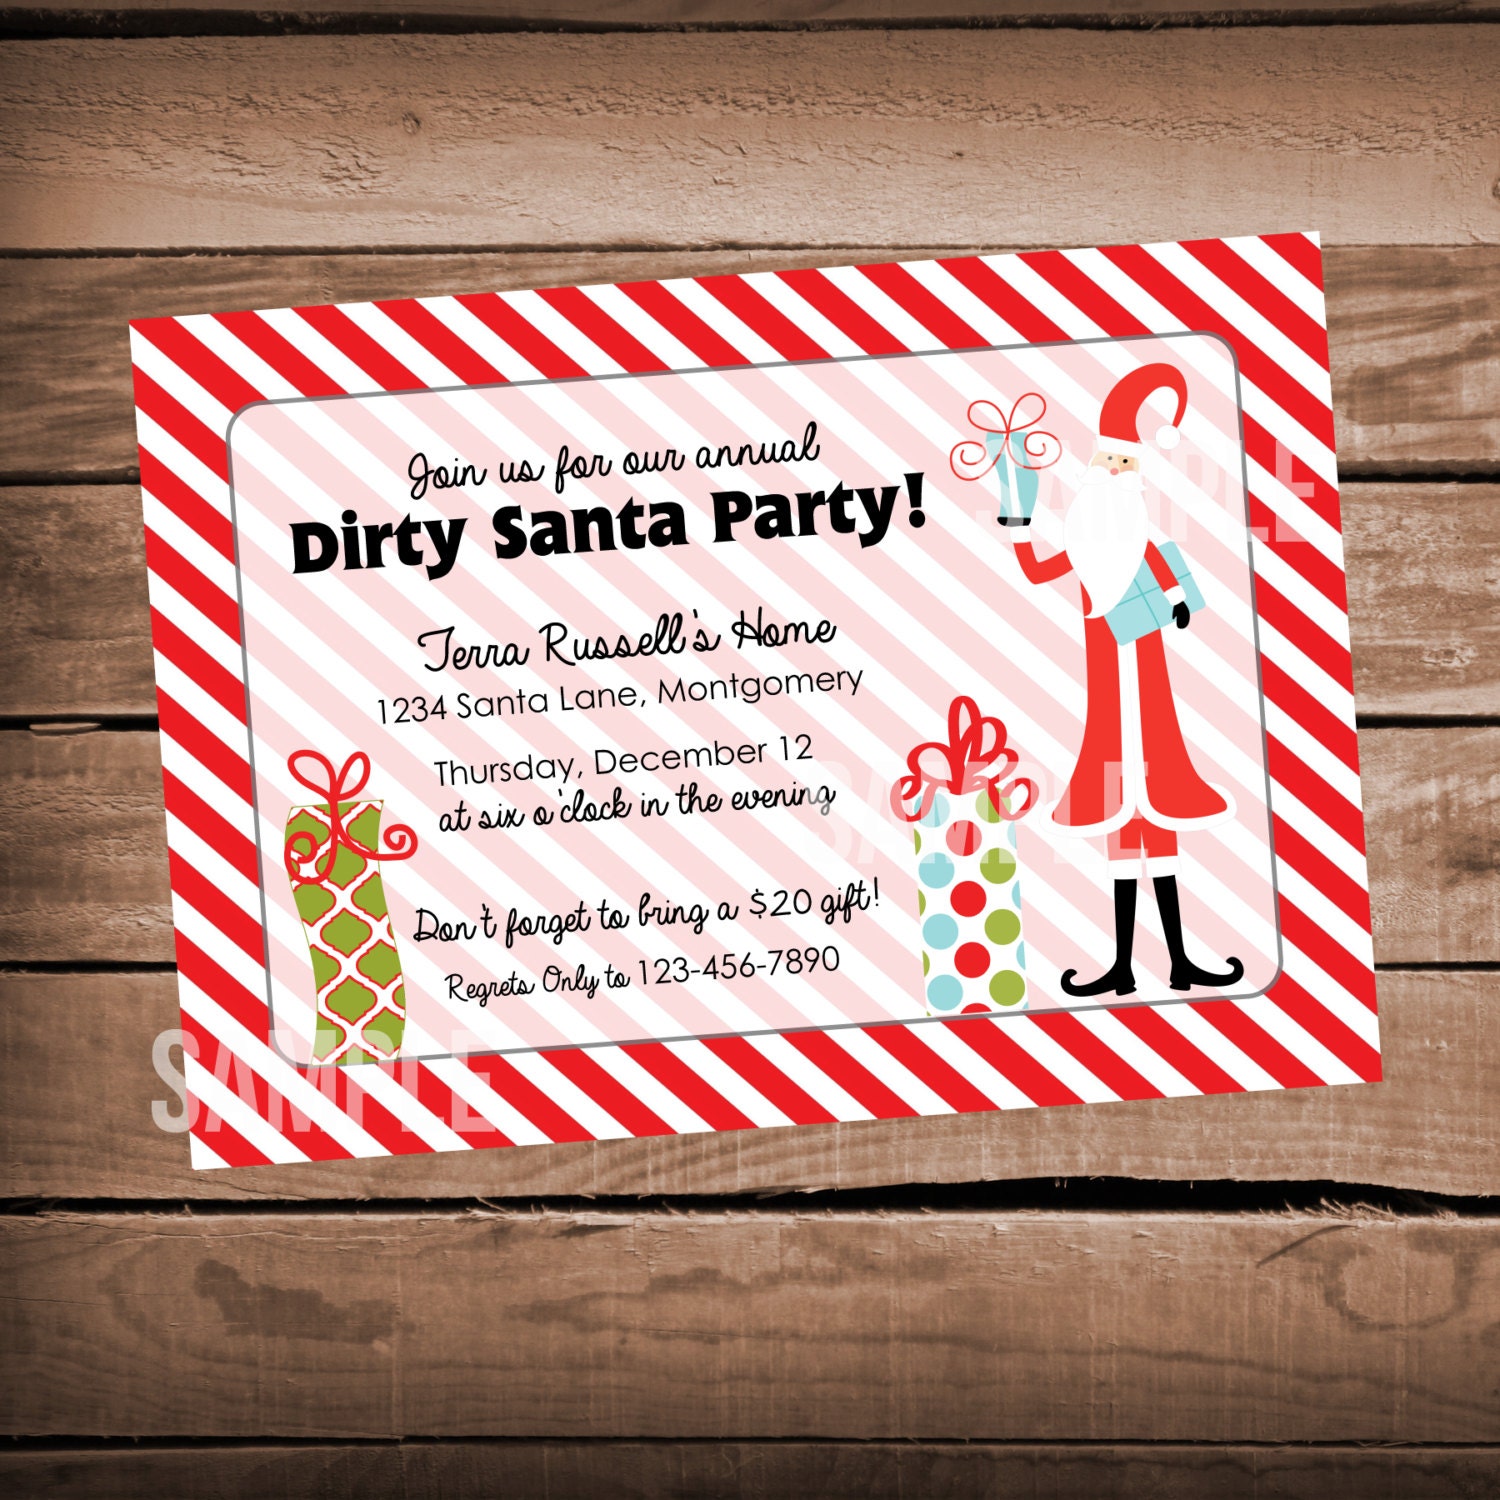 christmas-party-invitation-open-house-dirty-santa-red